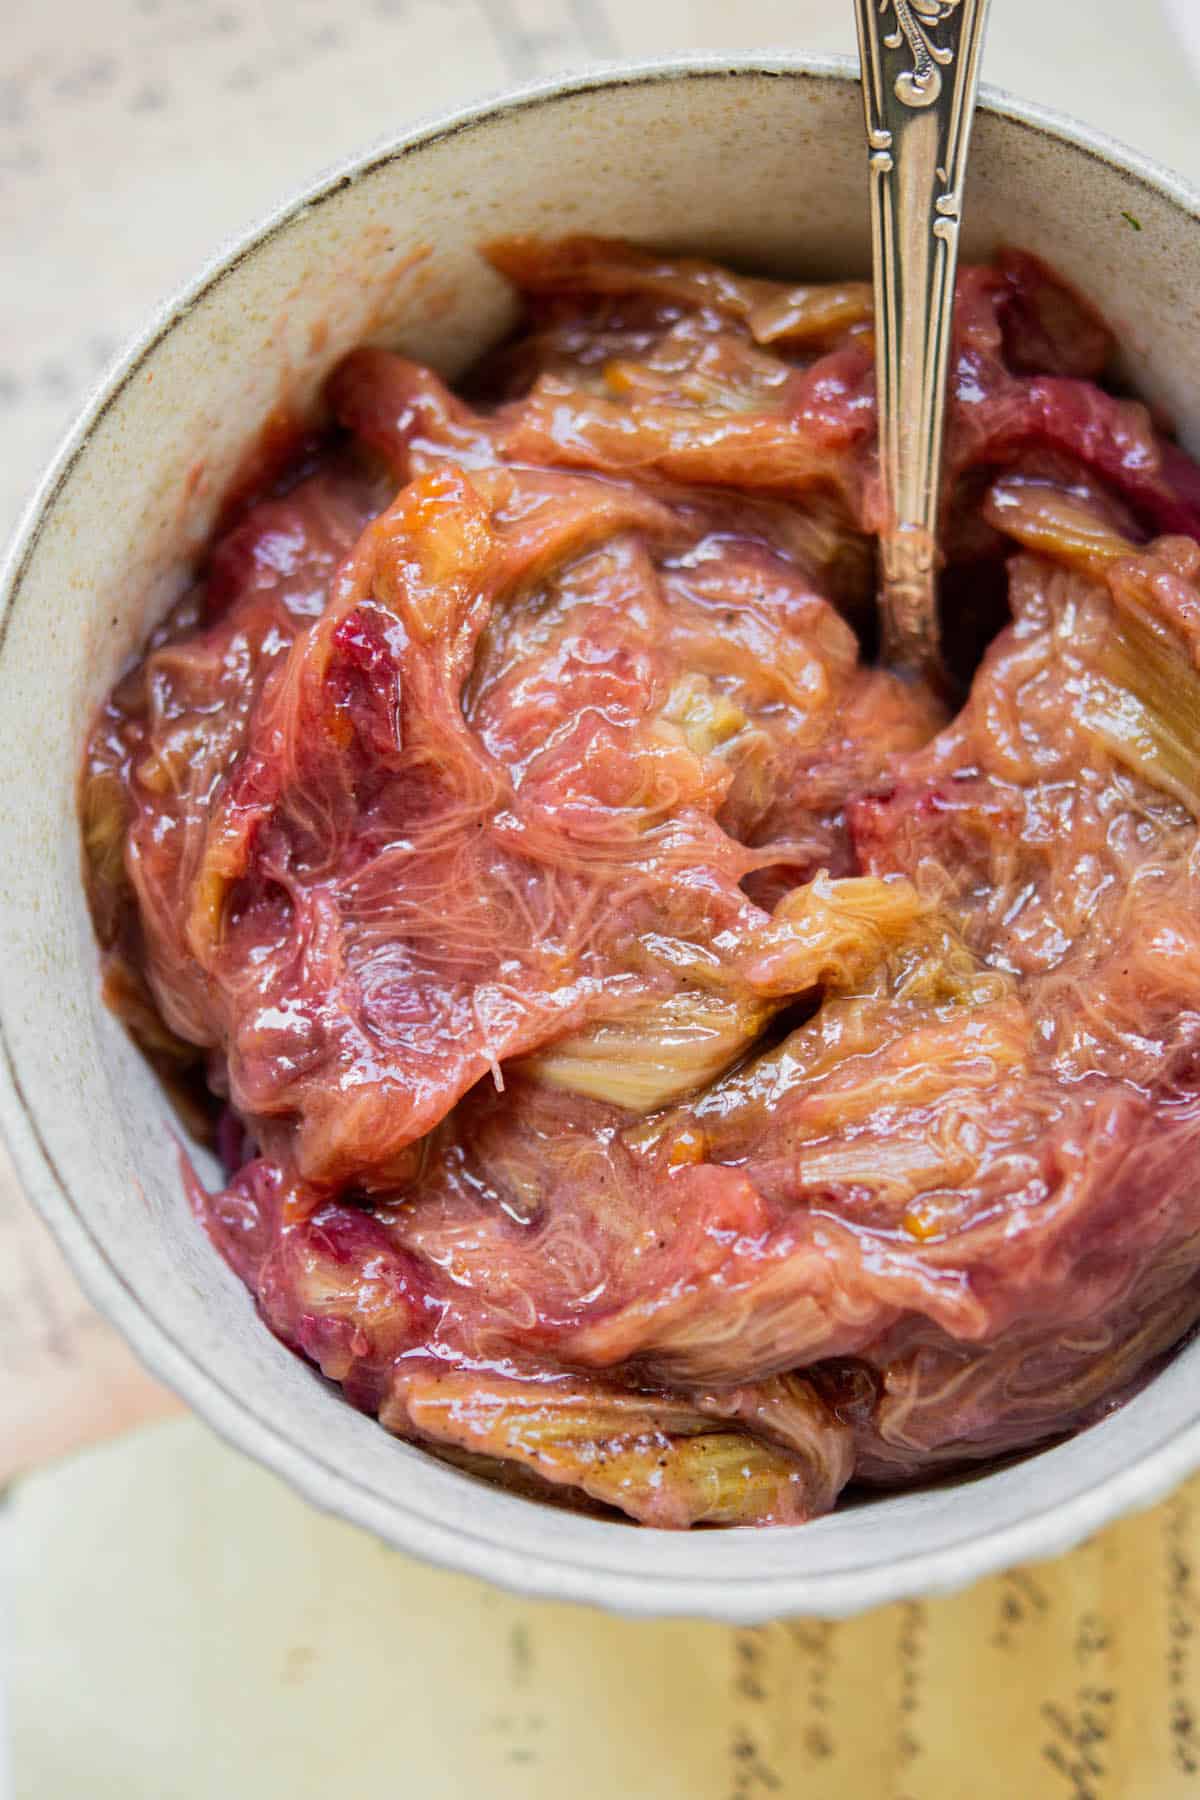 a bowl of rhubarb compote.